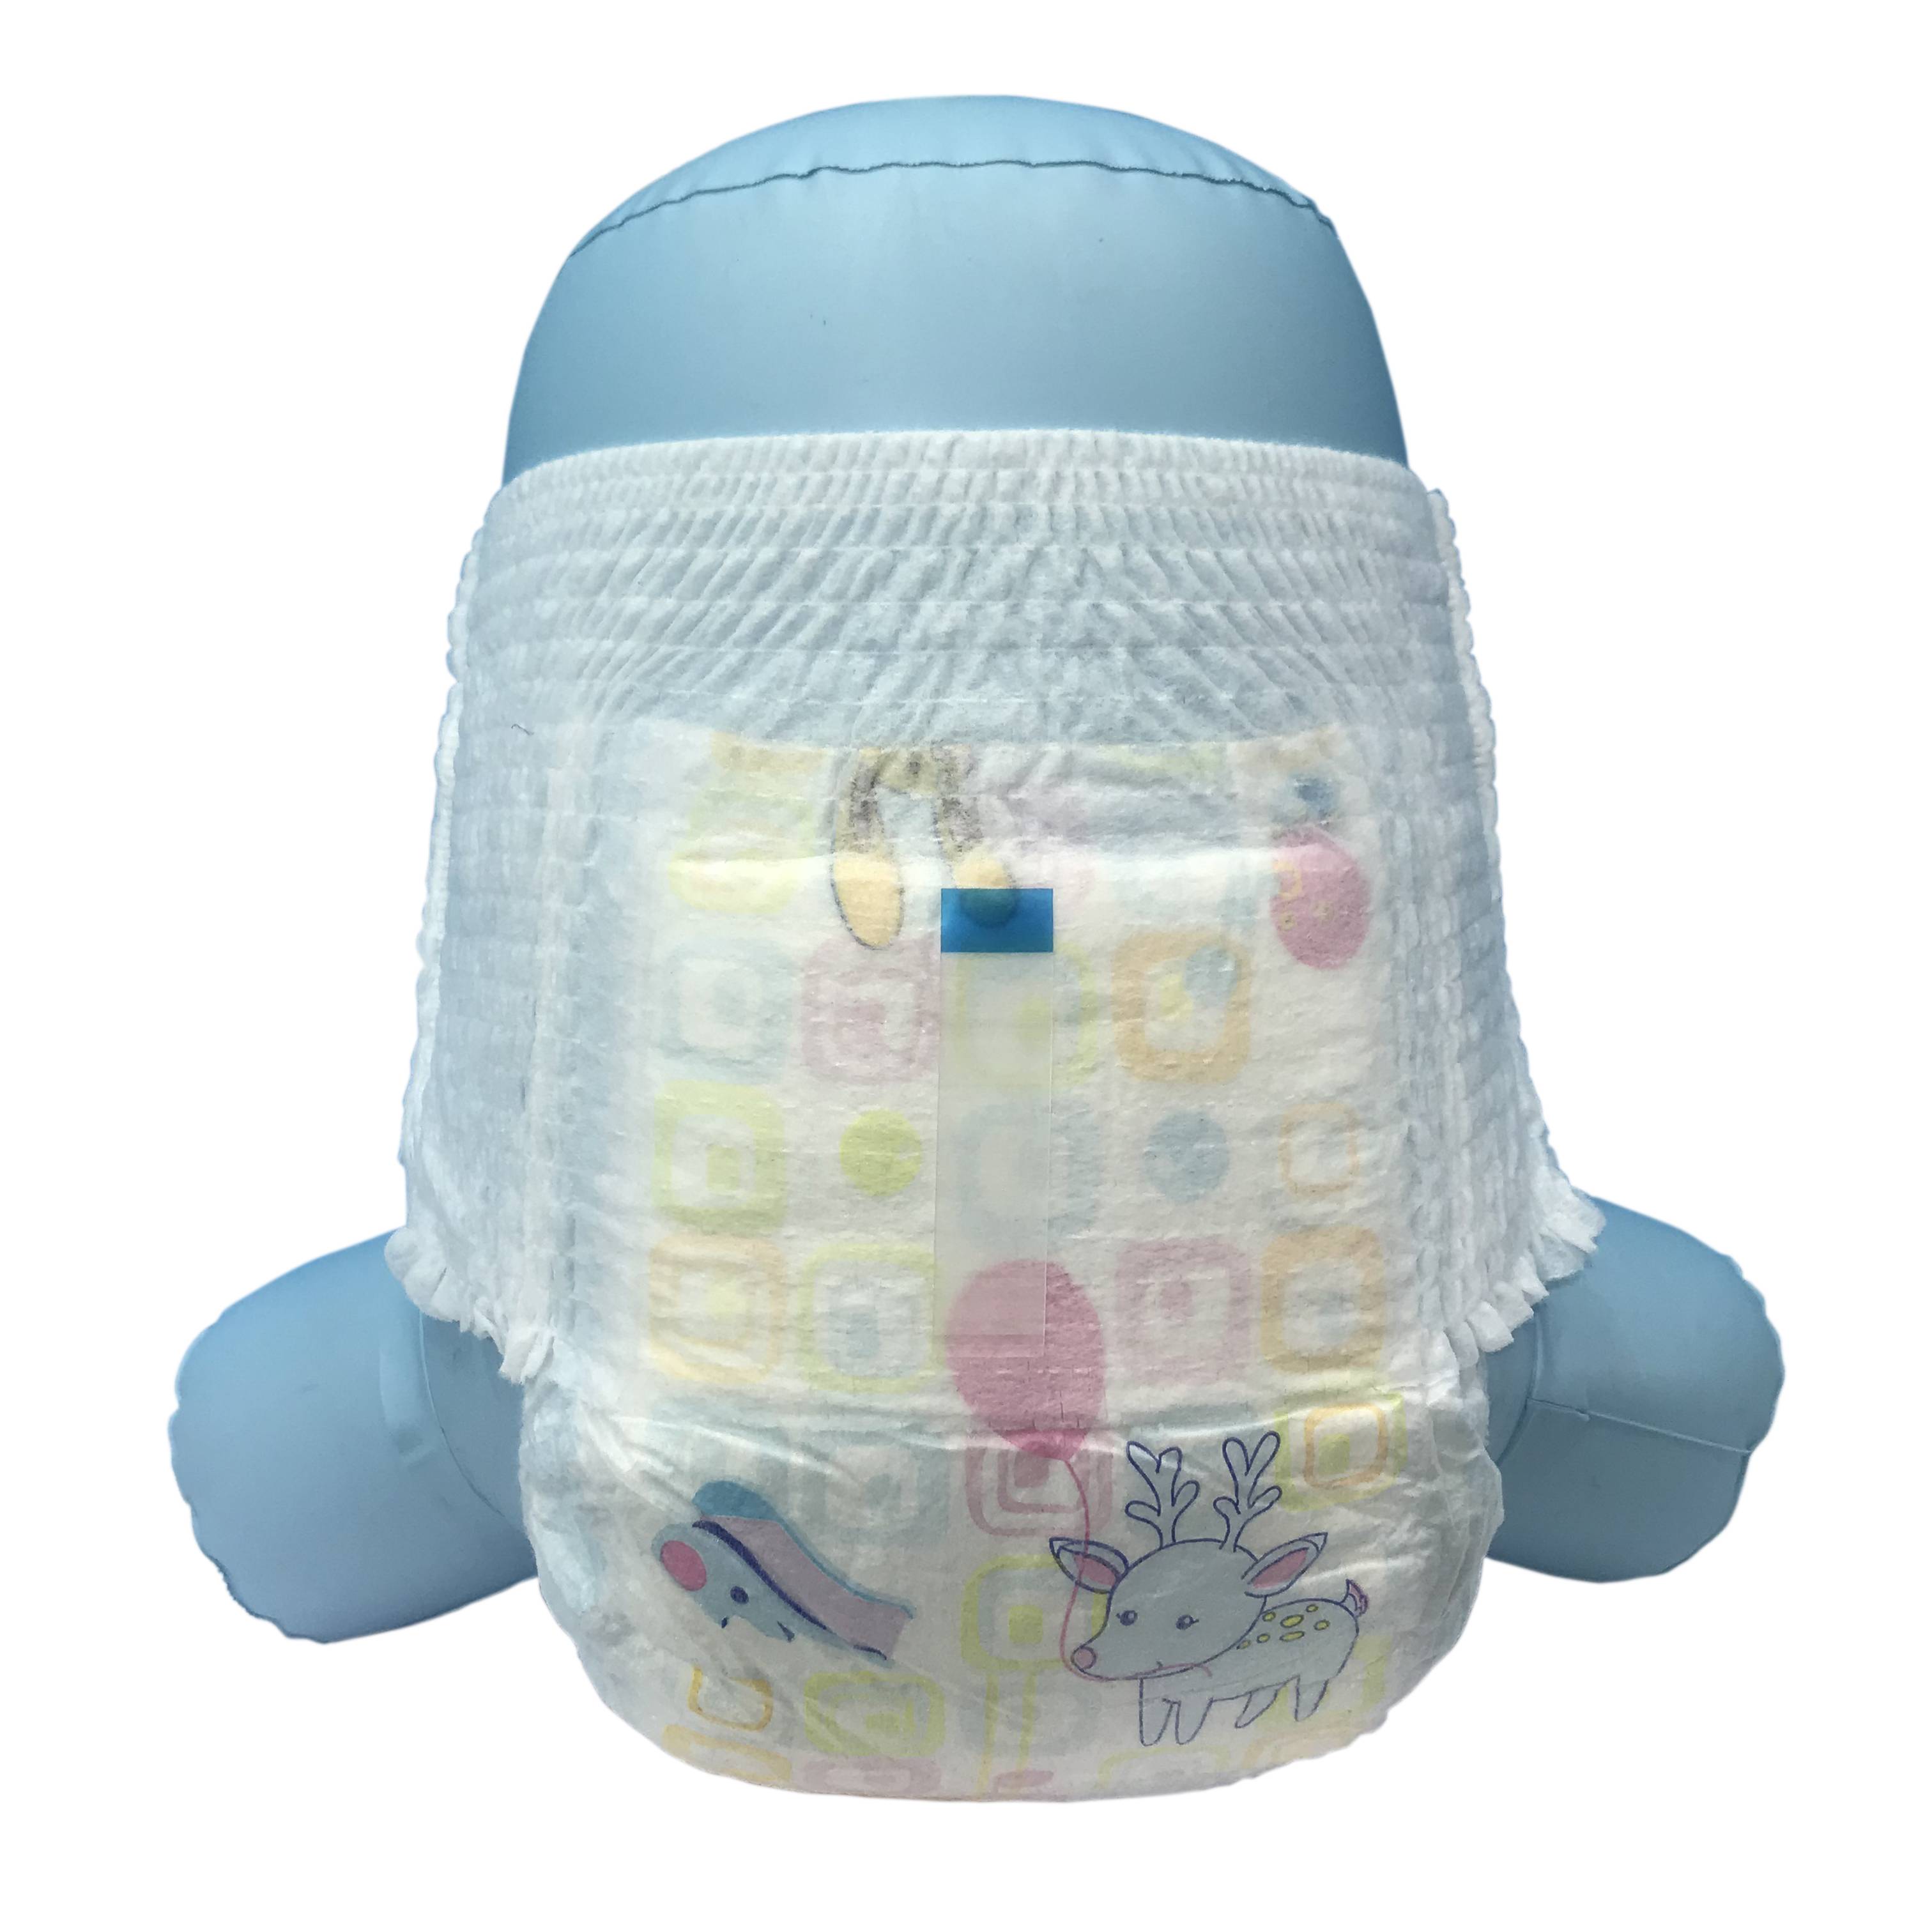 Unisoft organic good absorbency disposable baby diaper pants disposal baby manufacturer in Quanzhou